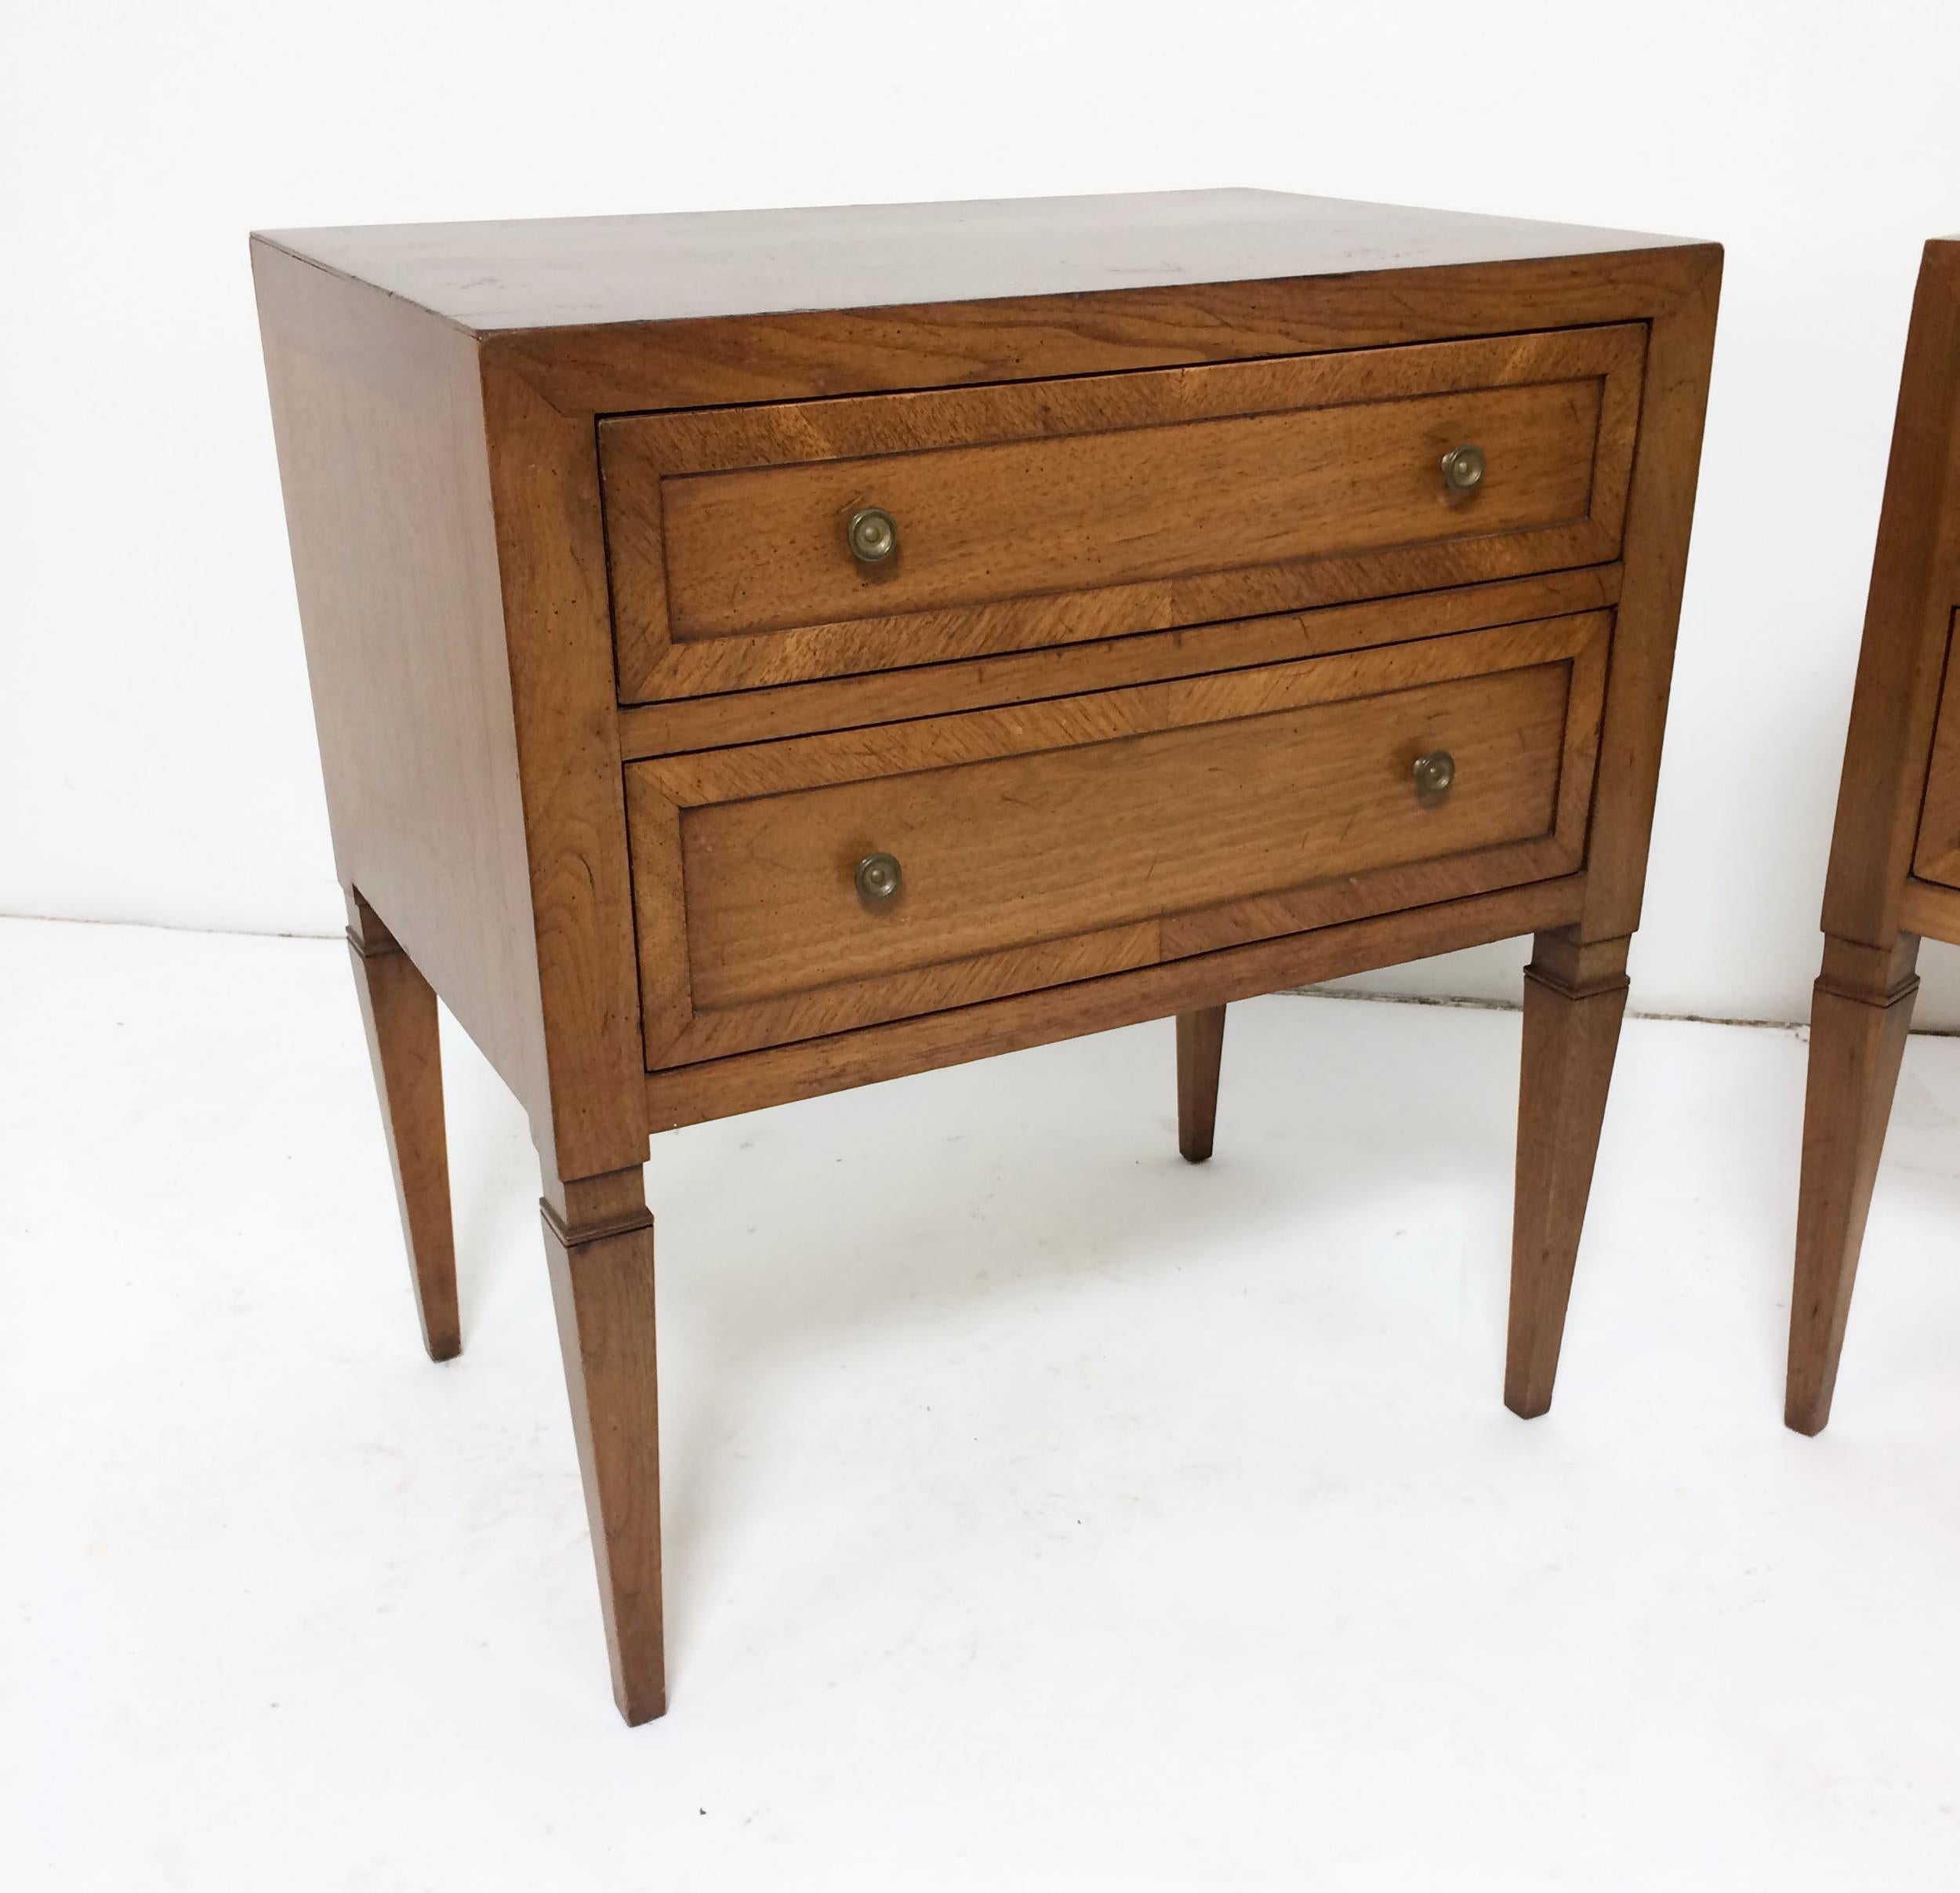 Pair of two-drawer nightstands, a midcentury interpretation of the Classic Federal style, for the Contessa Line by John Stuart, Inc., circa 1960s.